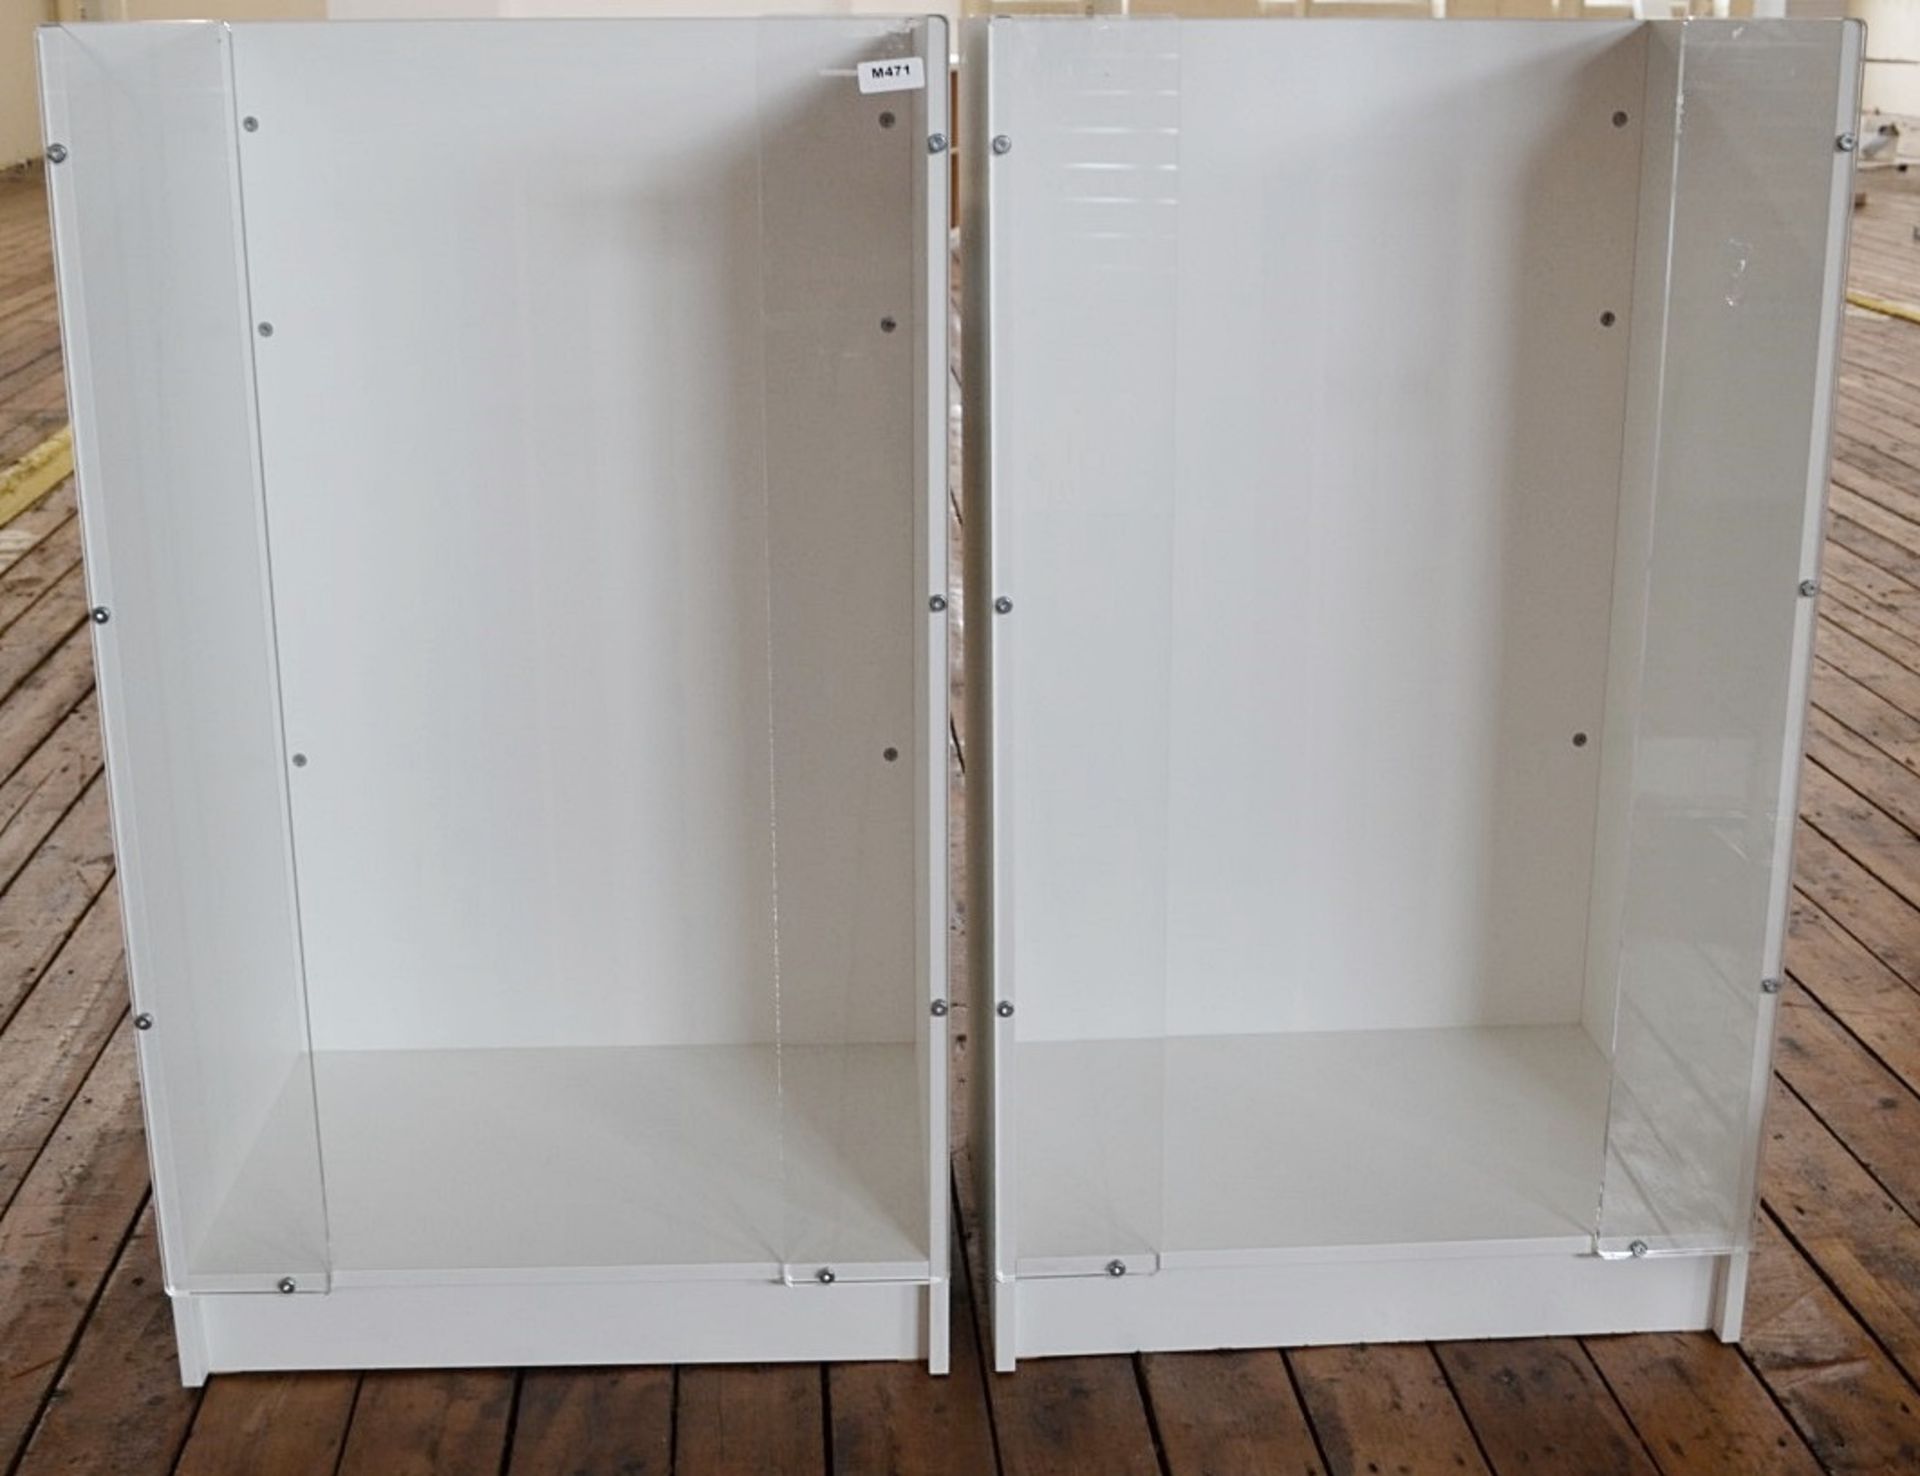 A Pair Of Retail Display With Perspex Panels - Dimensions: W70.5 x D51 x H120cm - Ref M471 F3 - Image 3 of 3